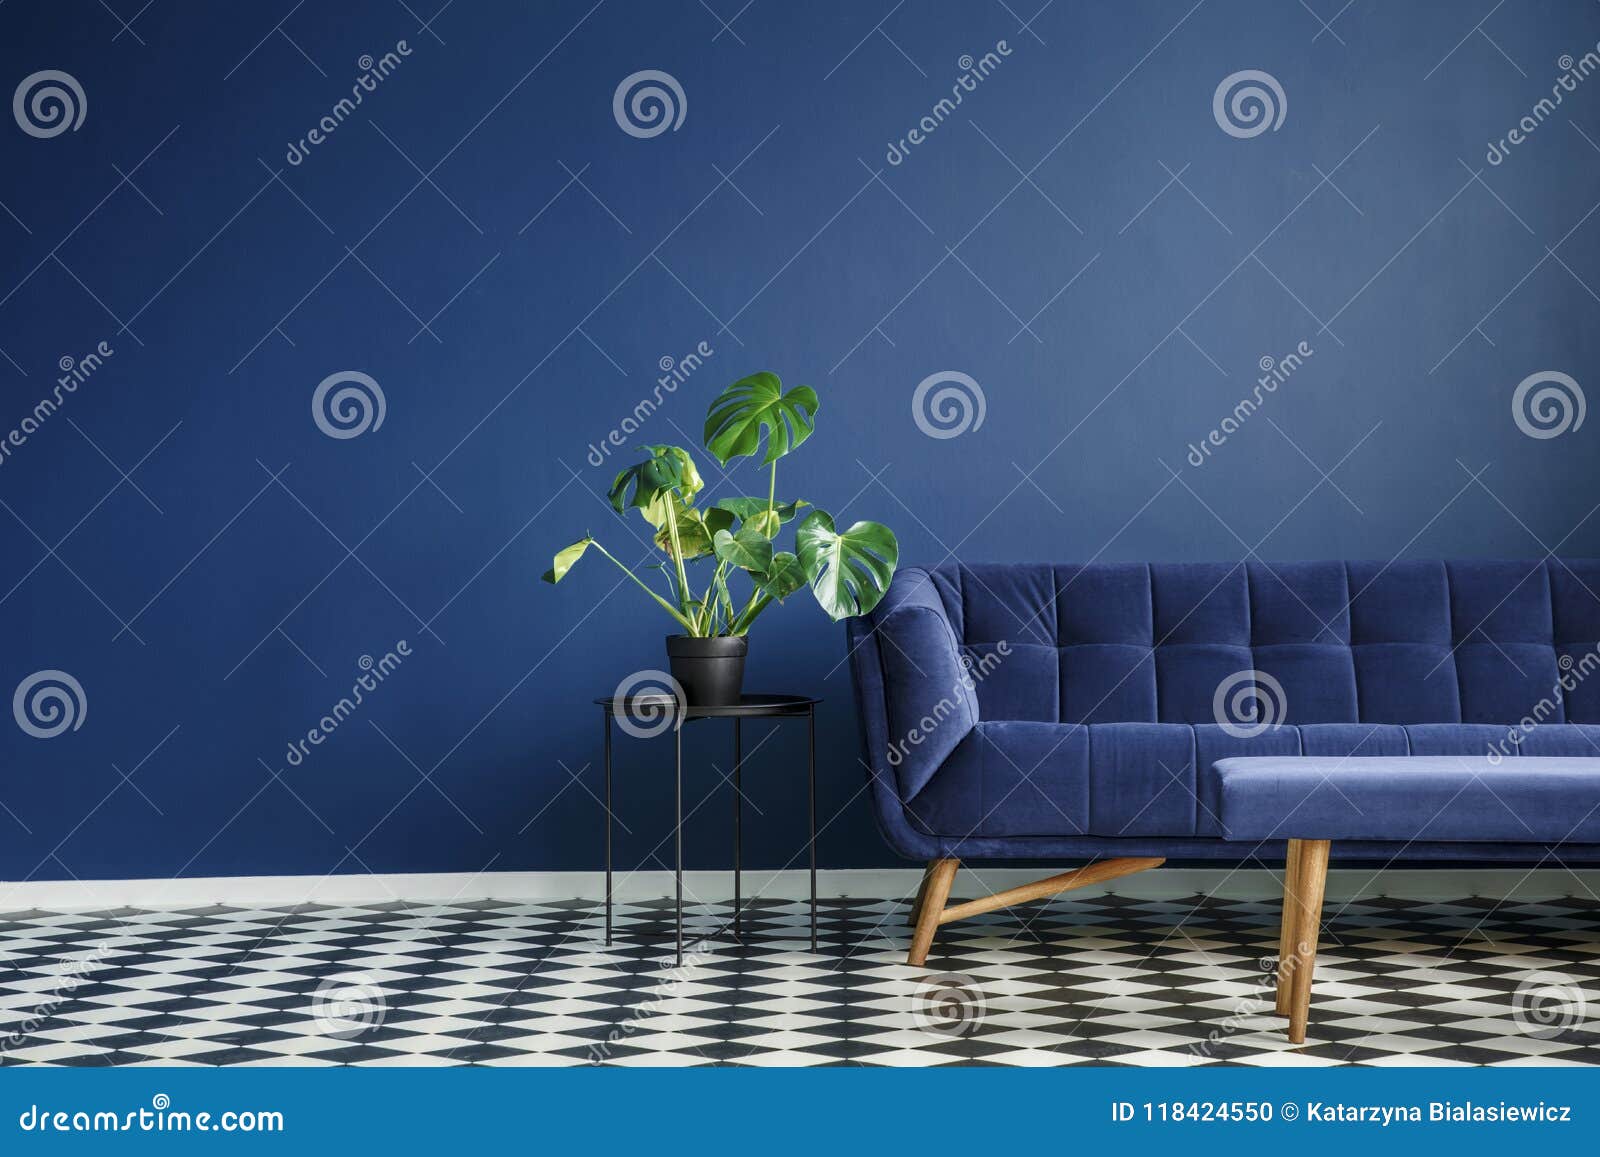 big plant on a stool next to a comfy couch and checkered tiles s